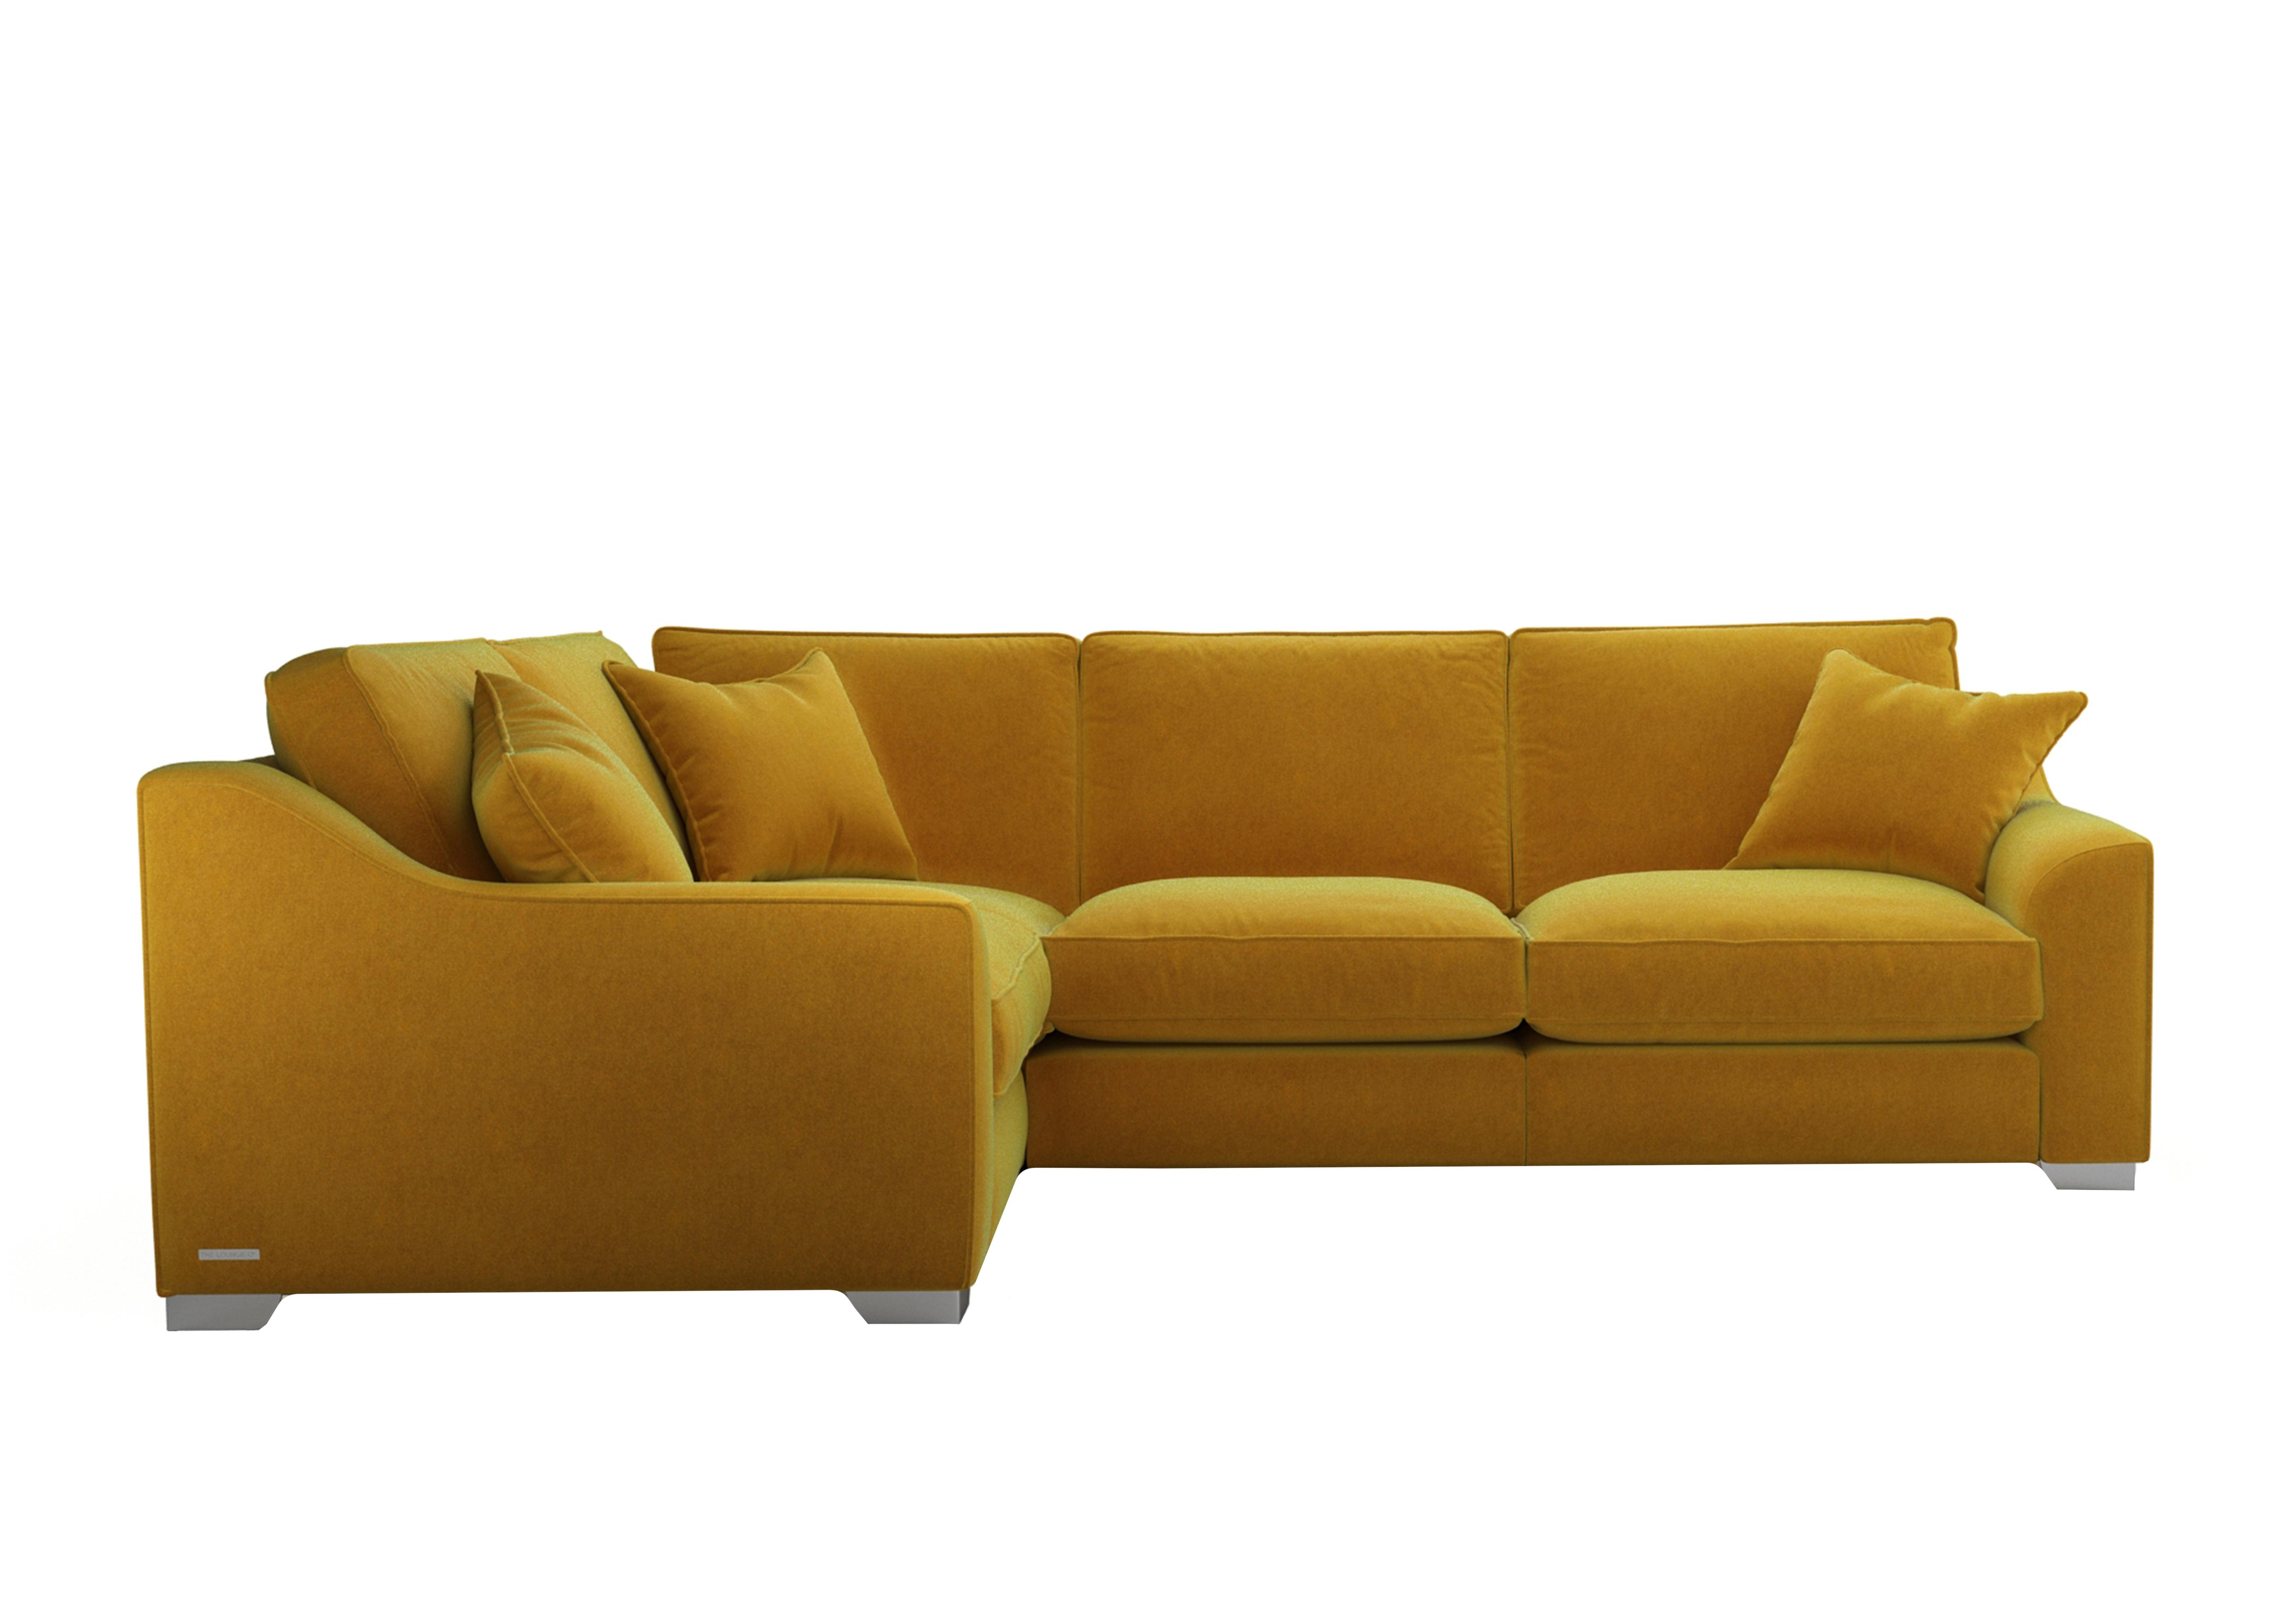 Isobel Small Fabric Corner Sofa in Gol204 Golden Spice Ch Ft on Furniture Village